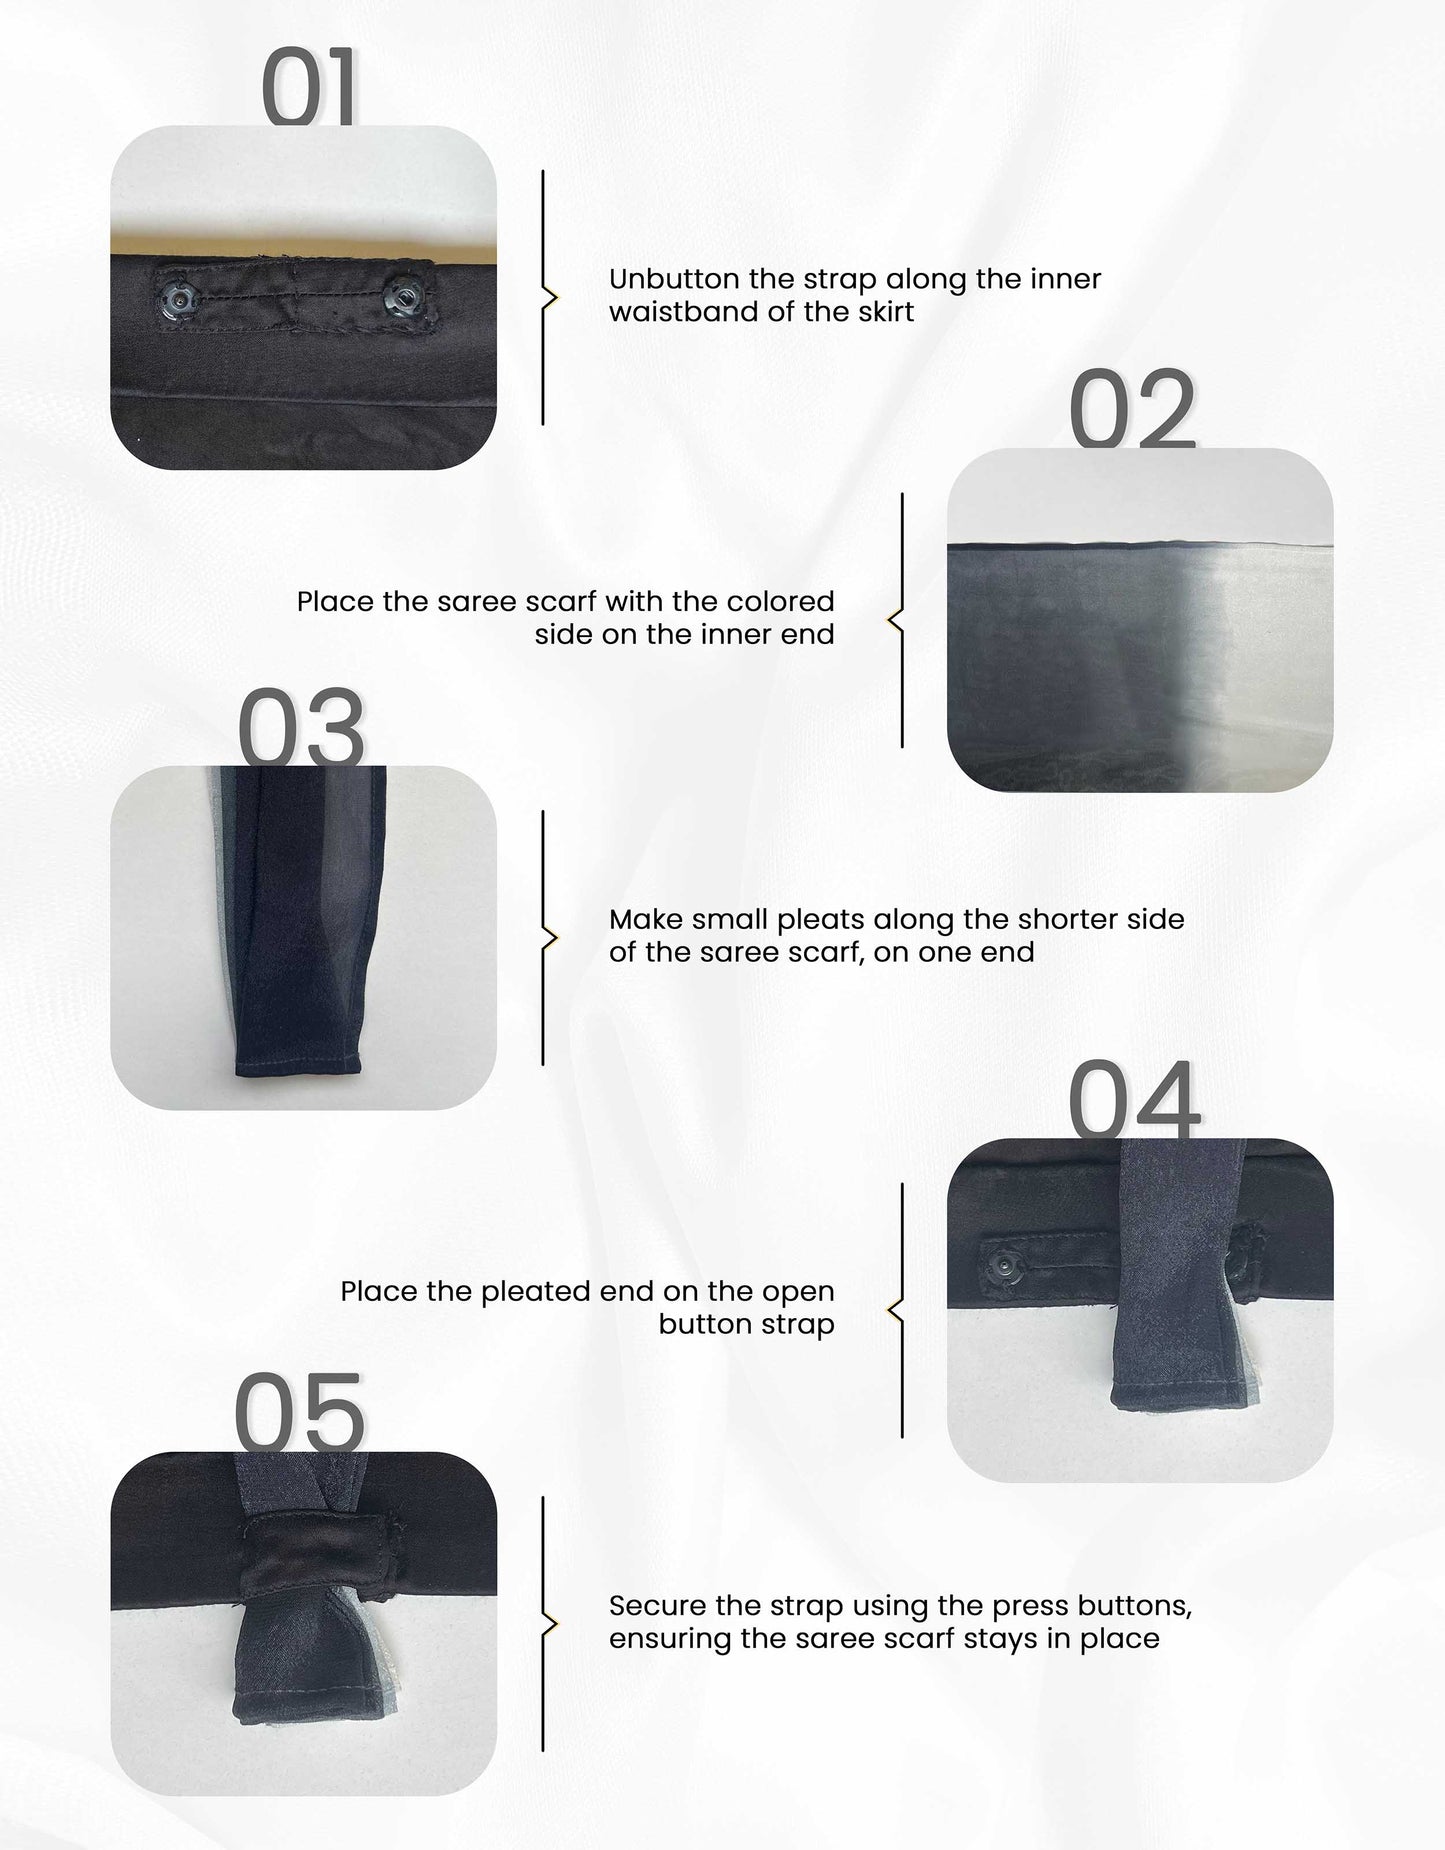 Hueloom's guide on how to detach or attach the scarf from the skirt in their allure capsule.